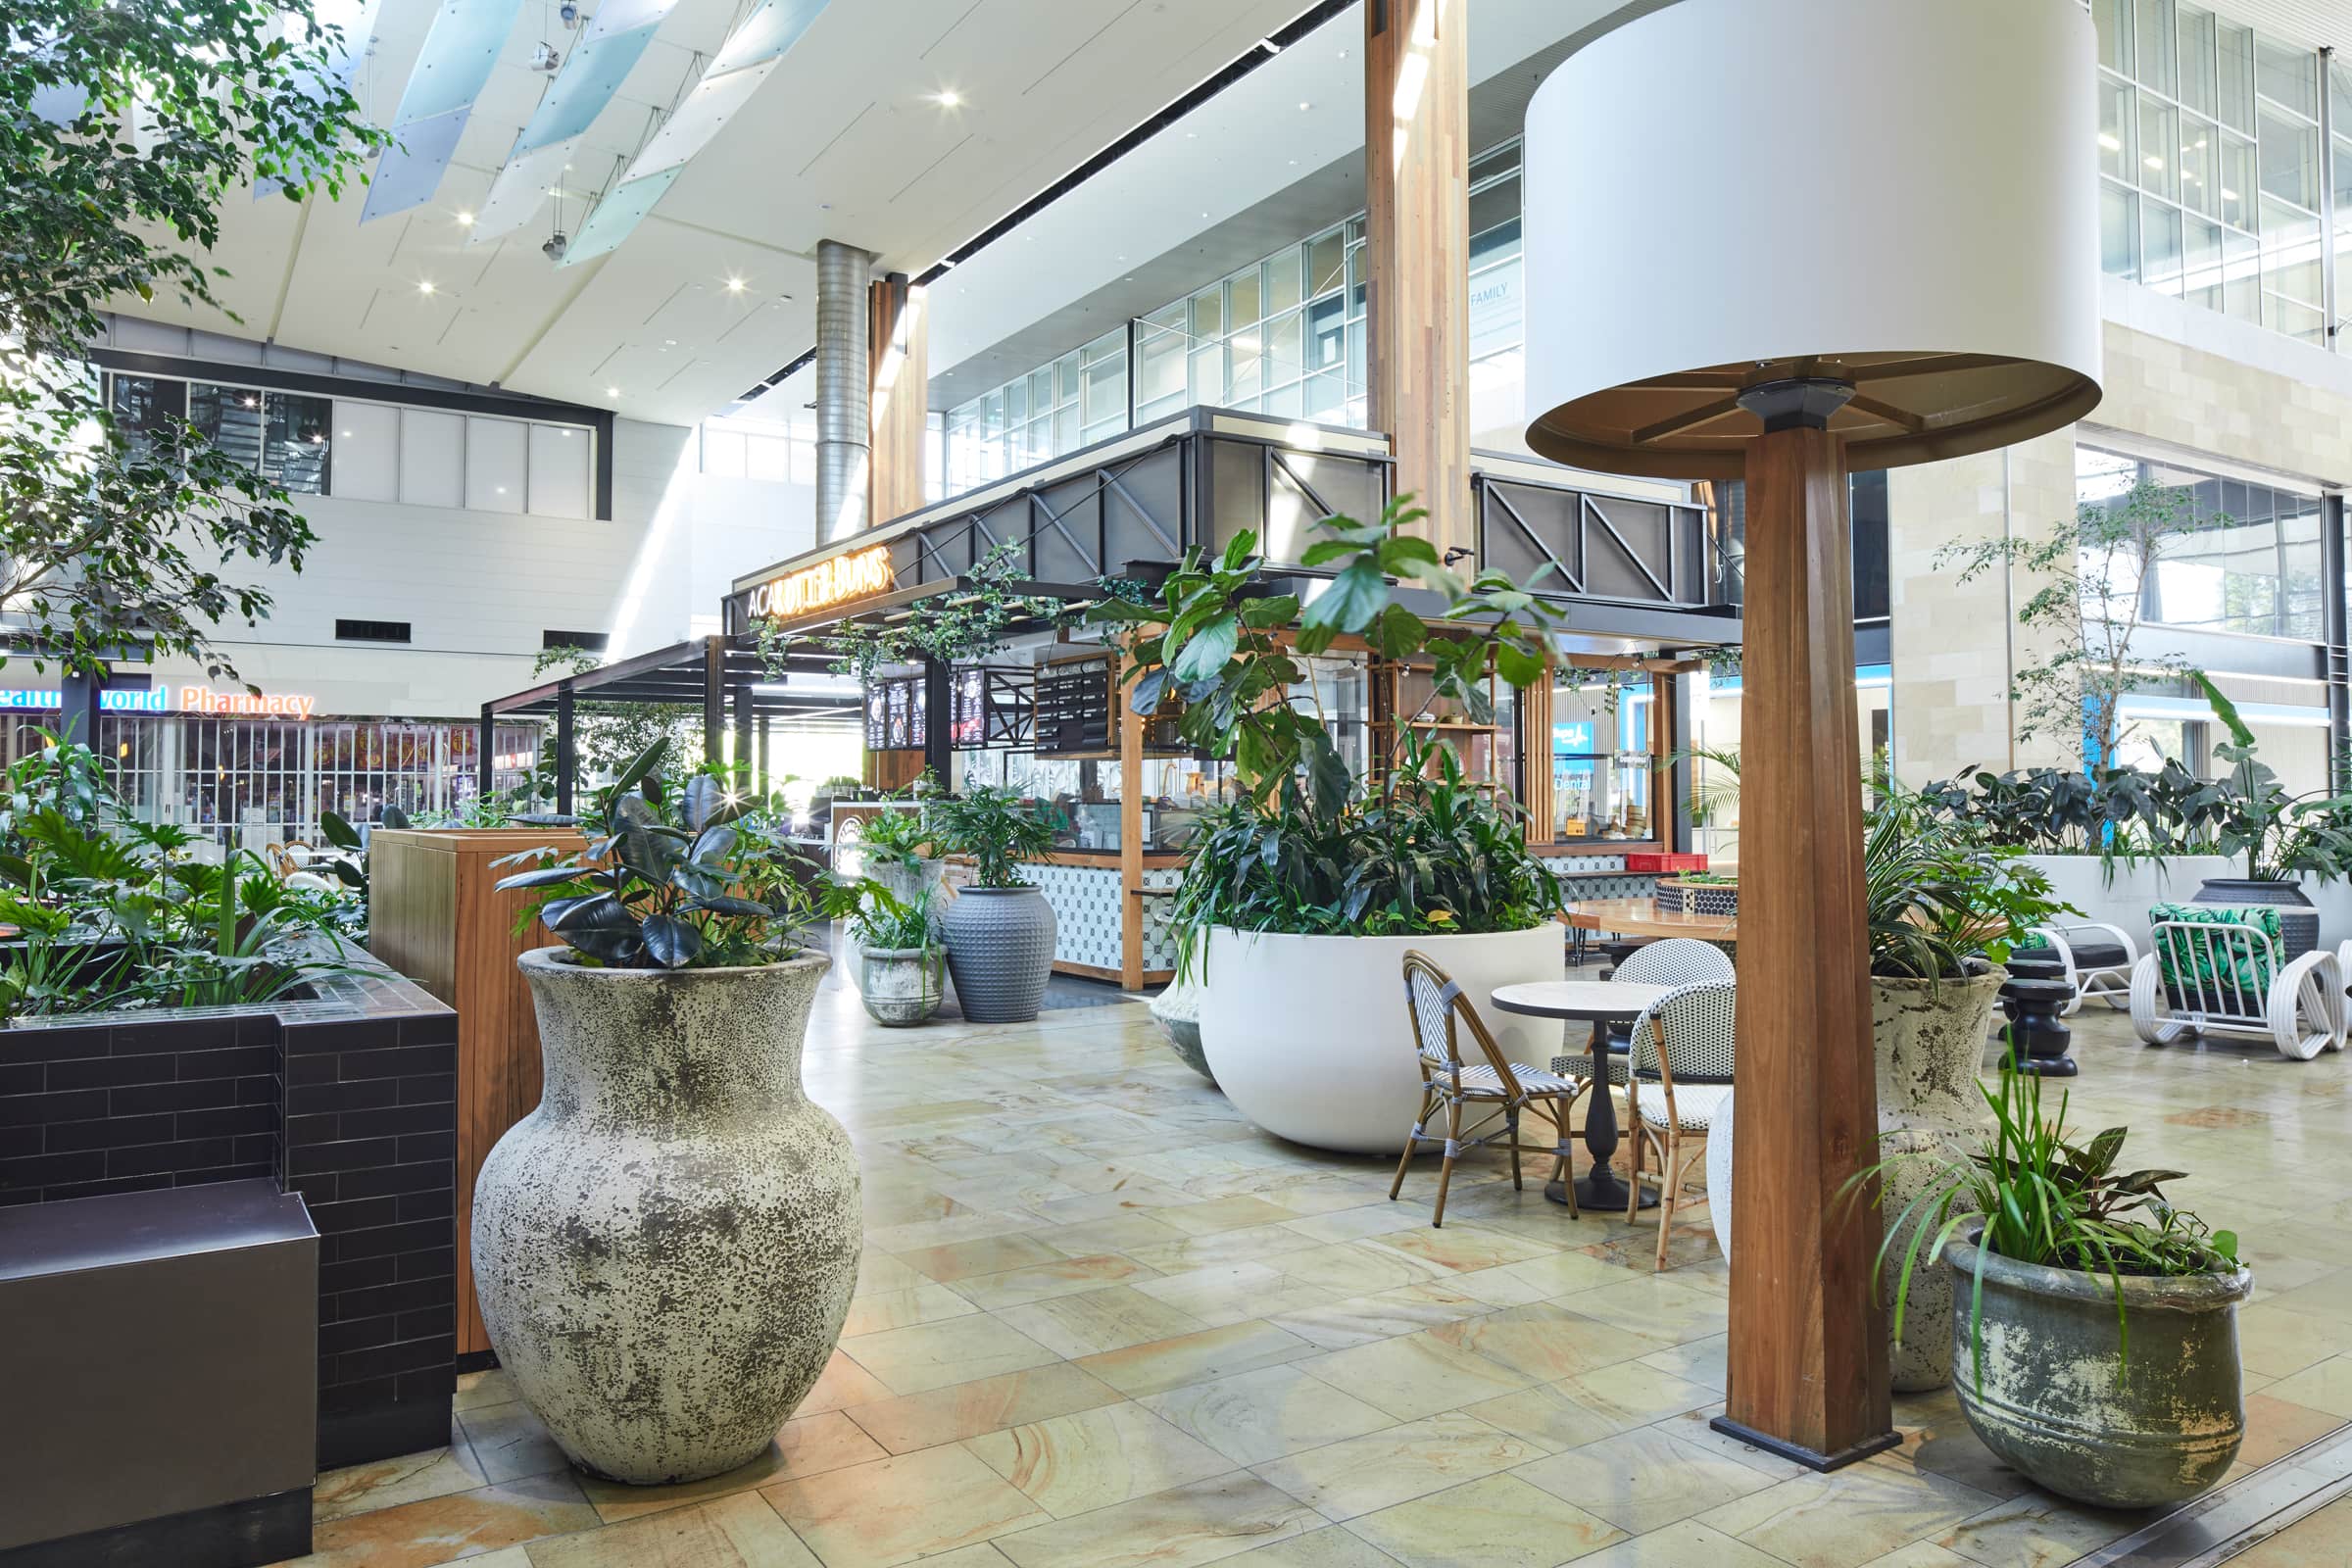 Retail shopping centre interior landscaping